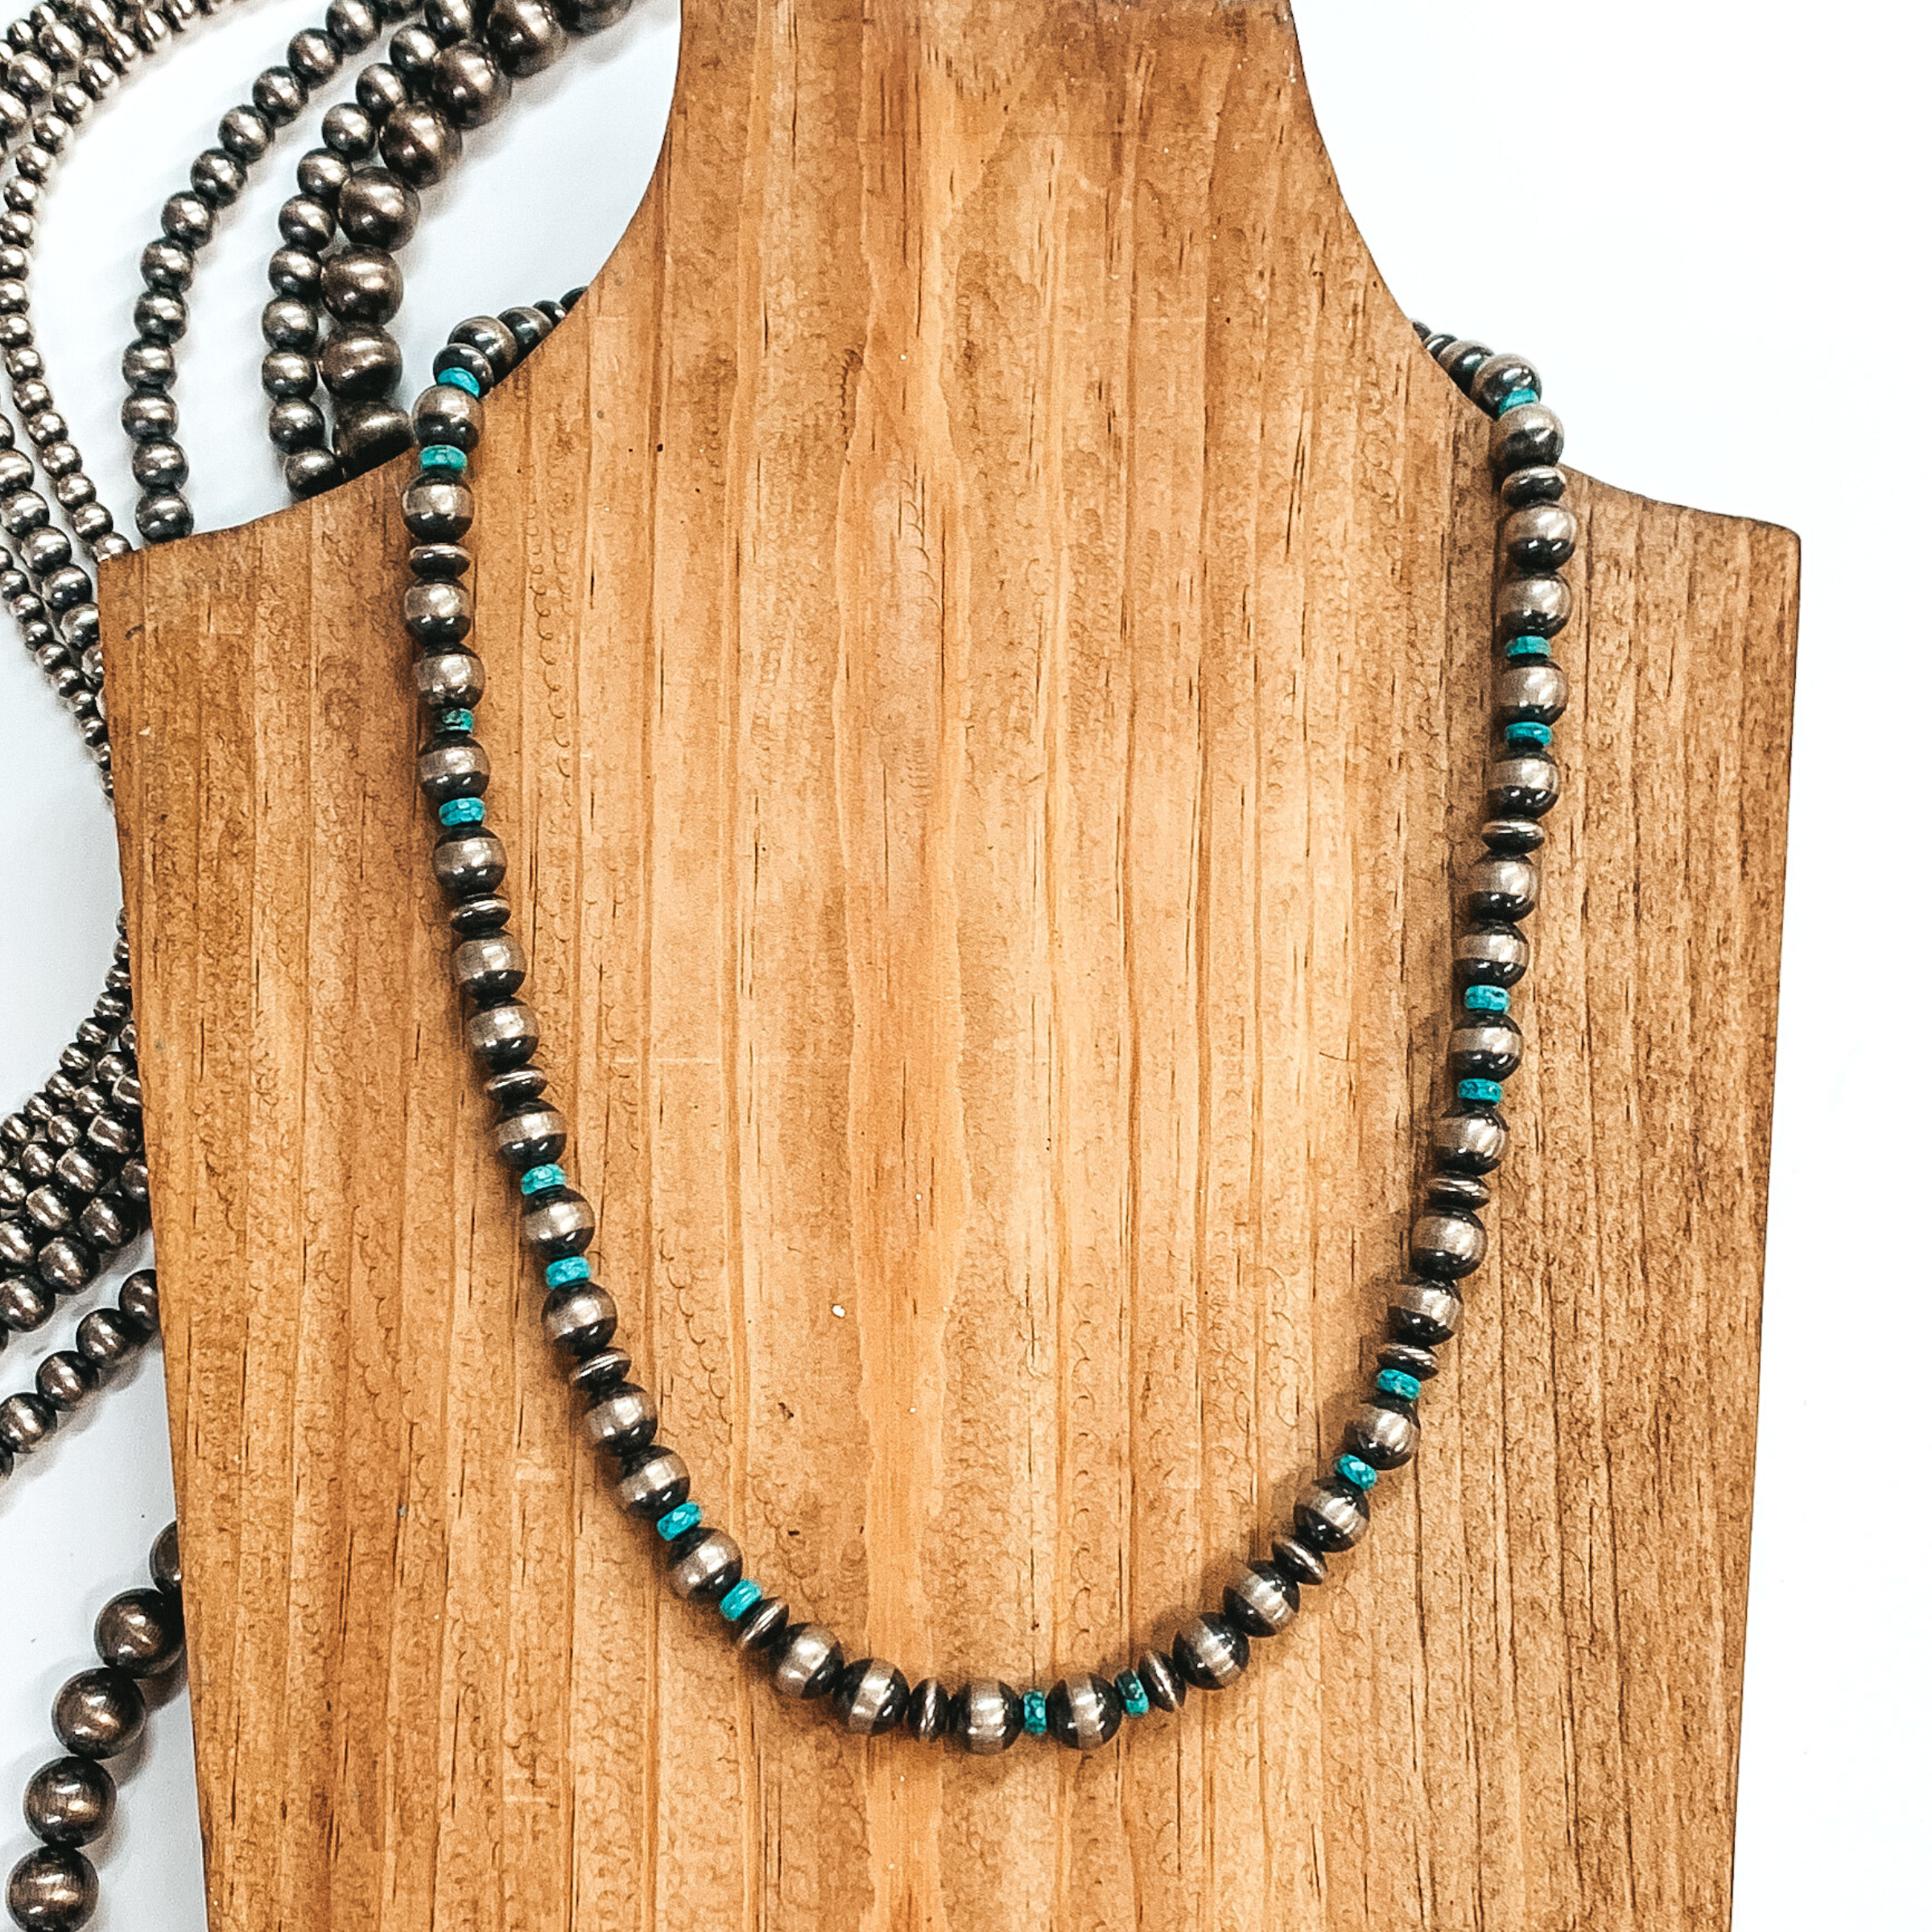 Navajo | Navajo Handmade 8mm Navajo Pearl Necklace with Saucer Pearl and Turquoise Spacers - Giddy Up Glamour Boutique